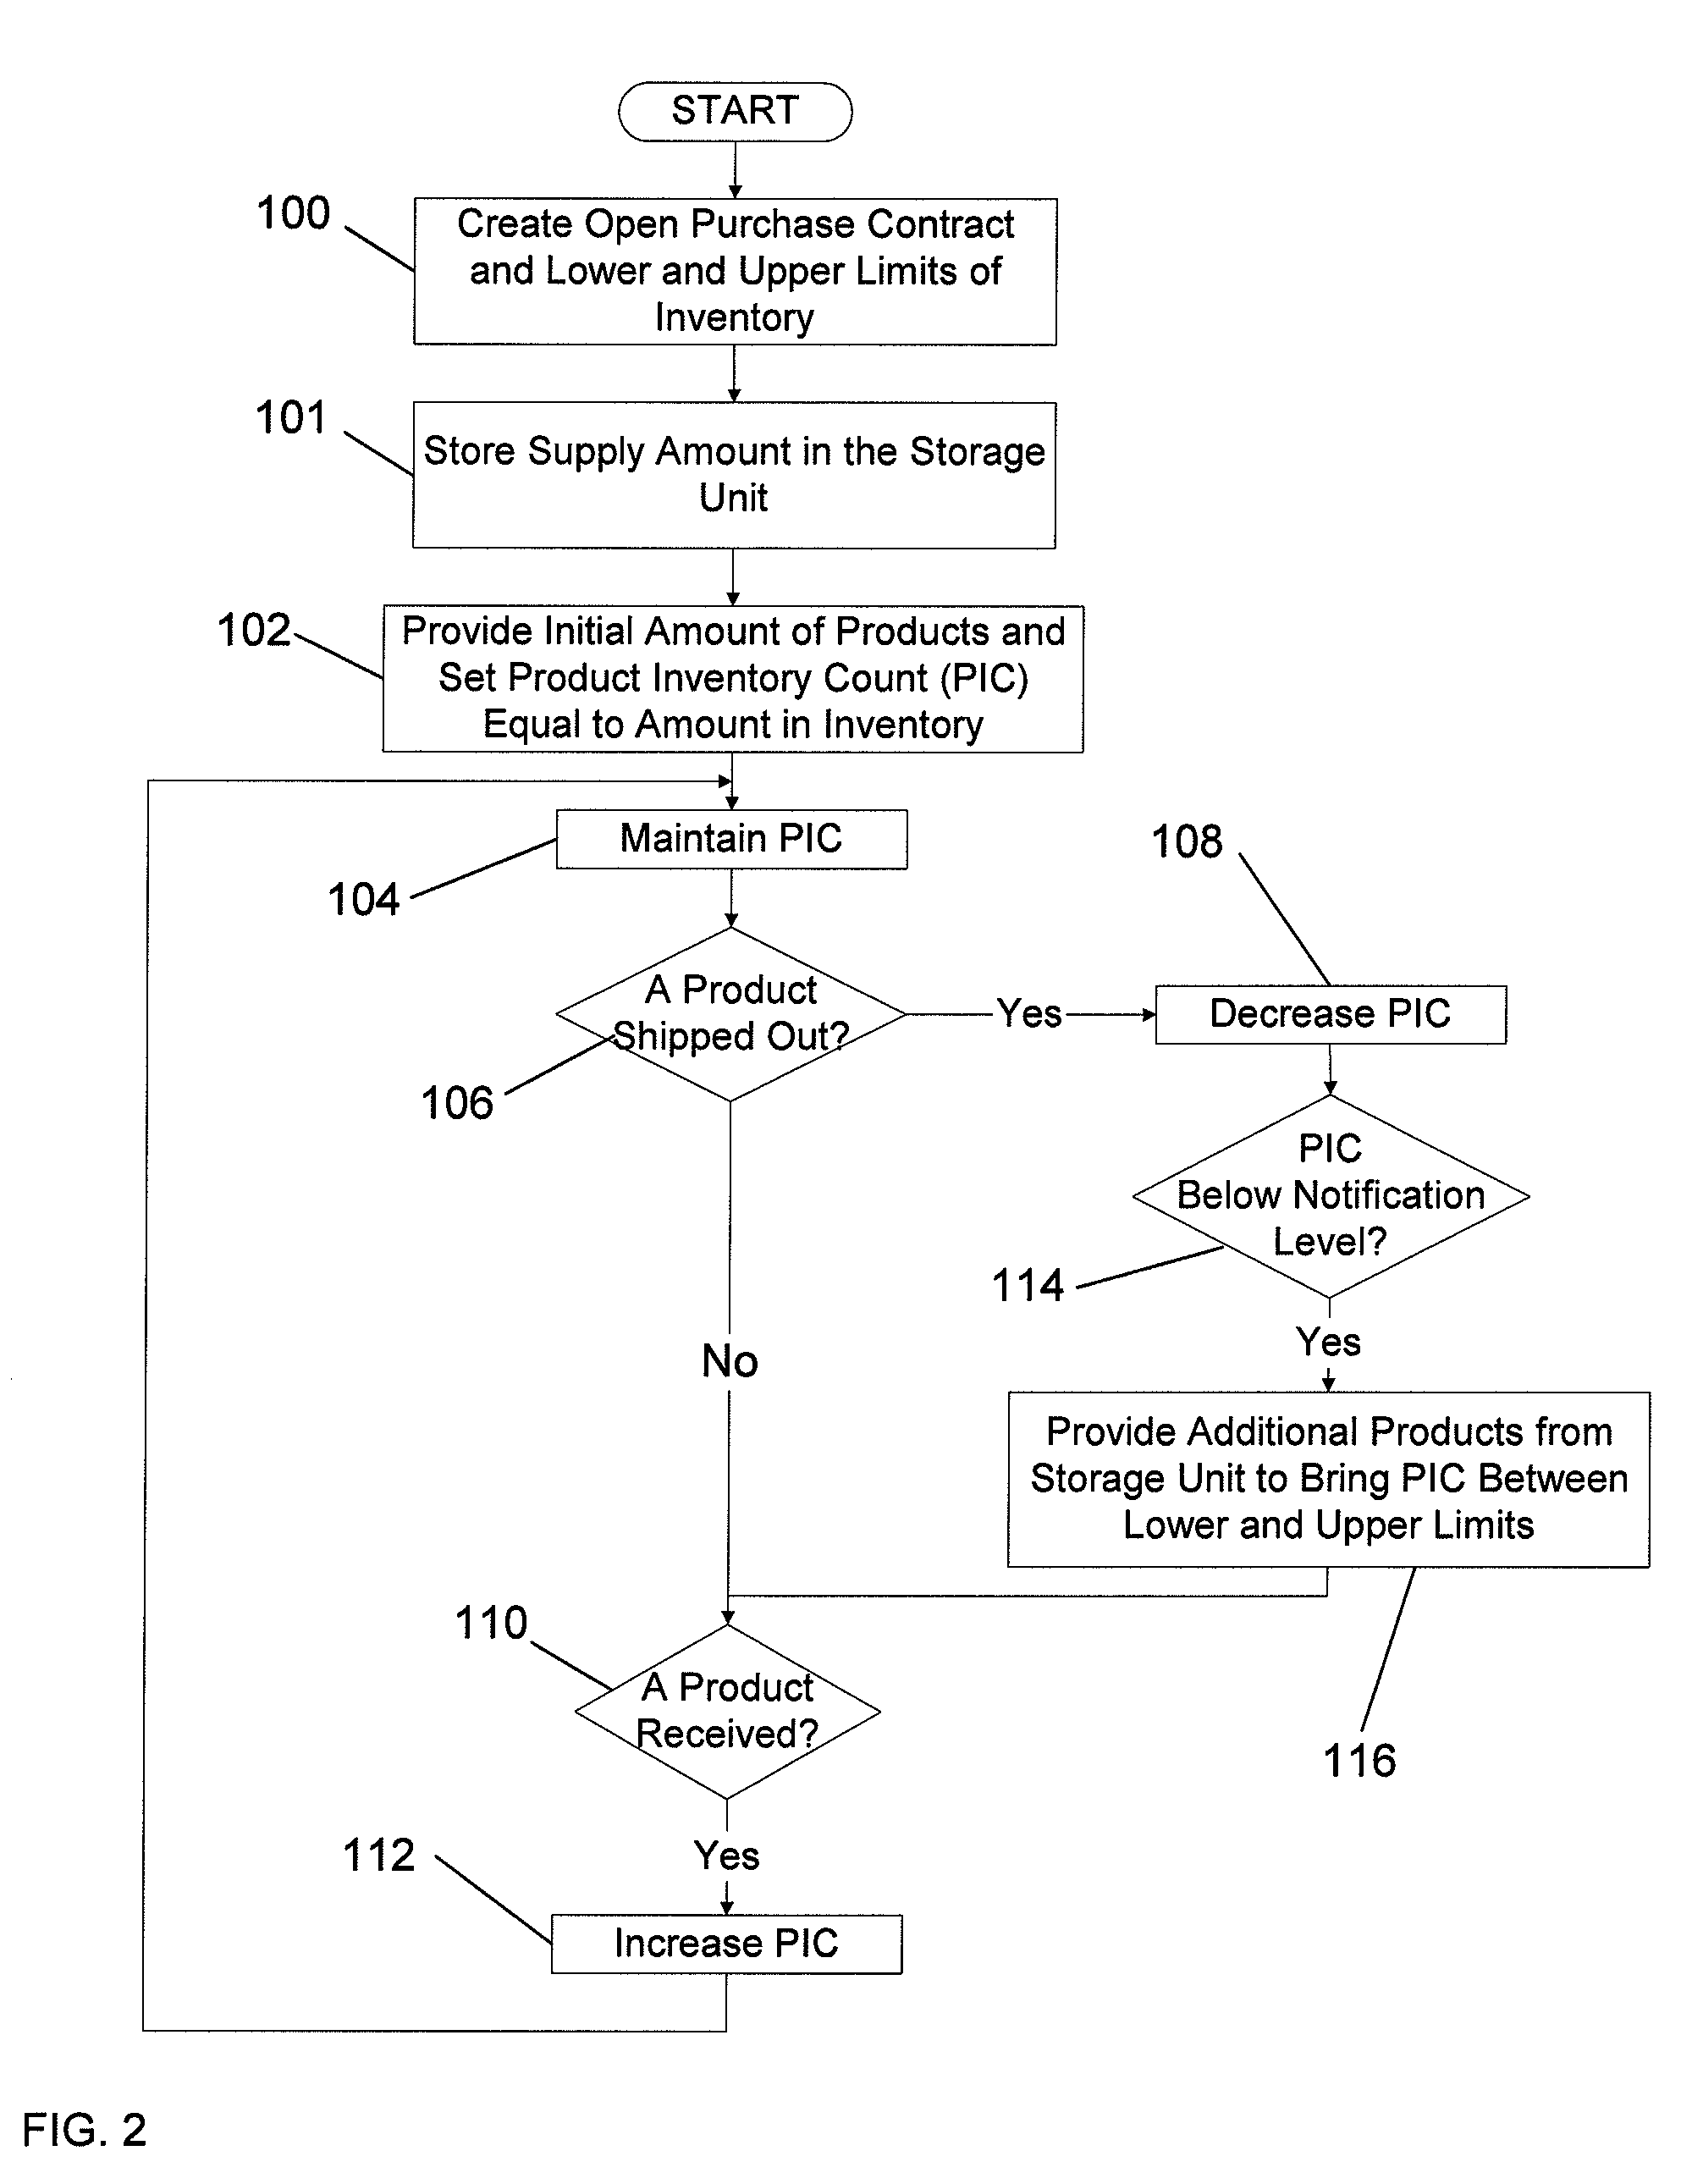 Apparatus, method and computer program product for transferring an electronic file